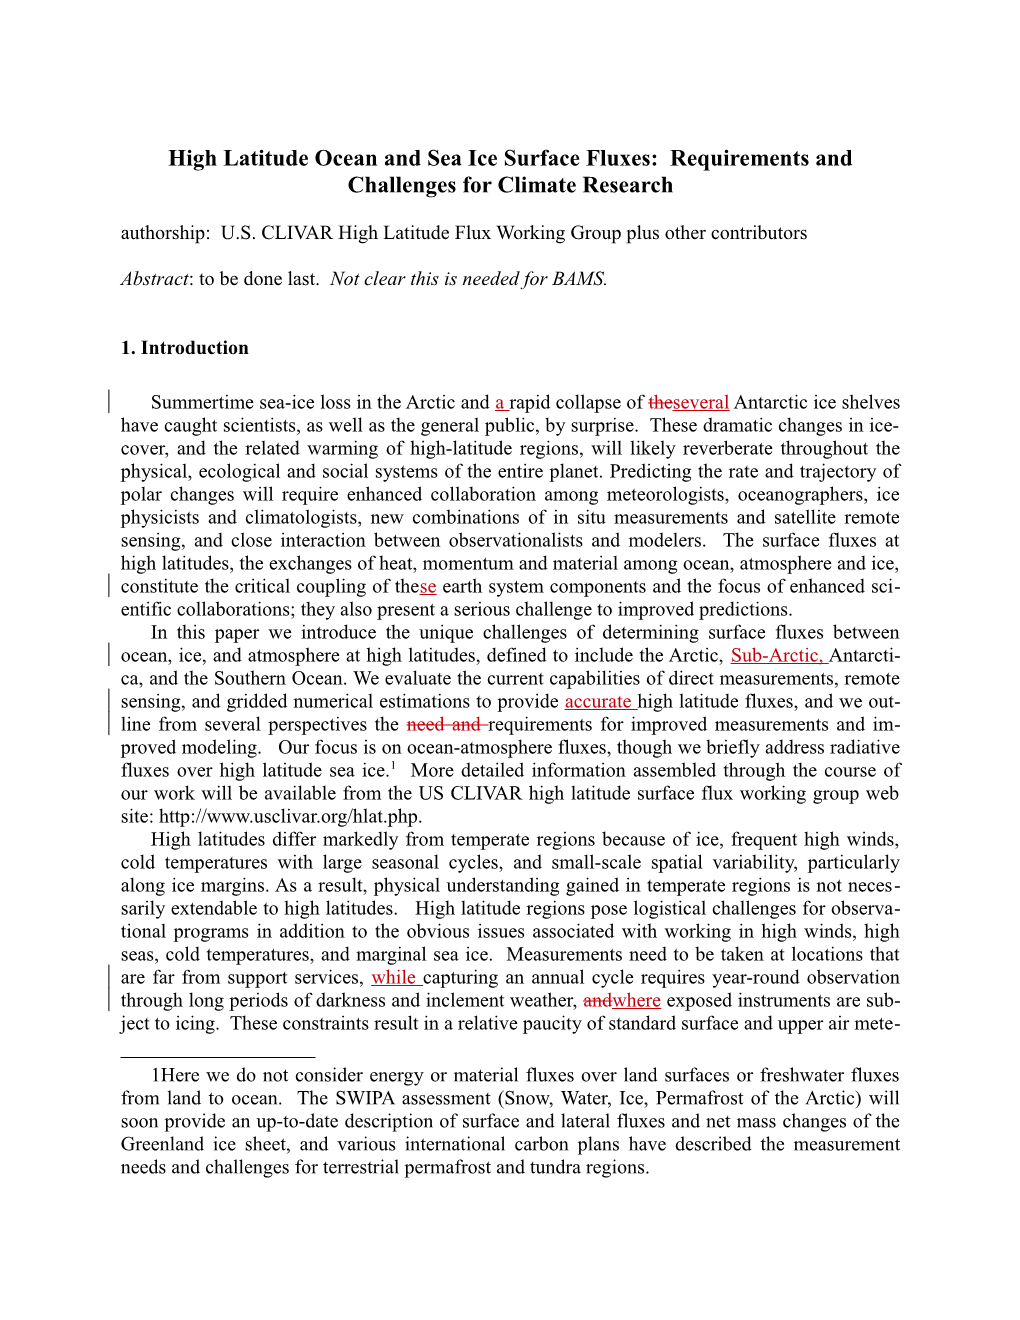 Outline: High Latitude Surface Fluxes: Requirements and Challenges for Climate Research